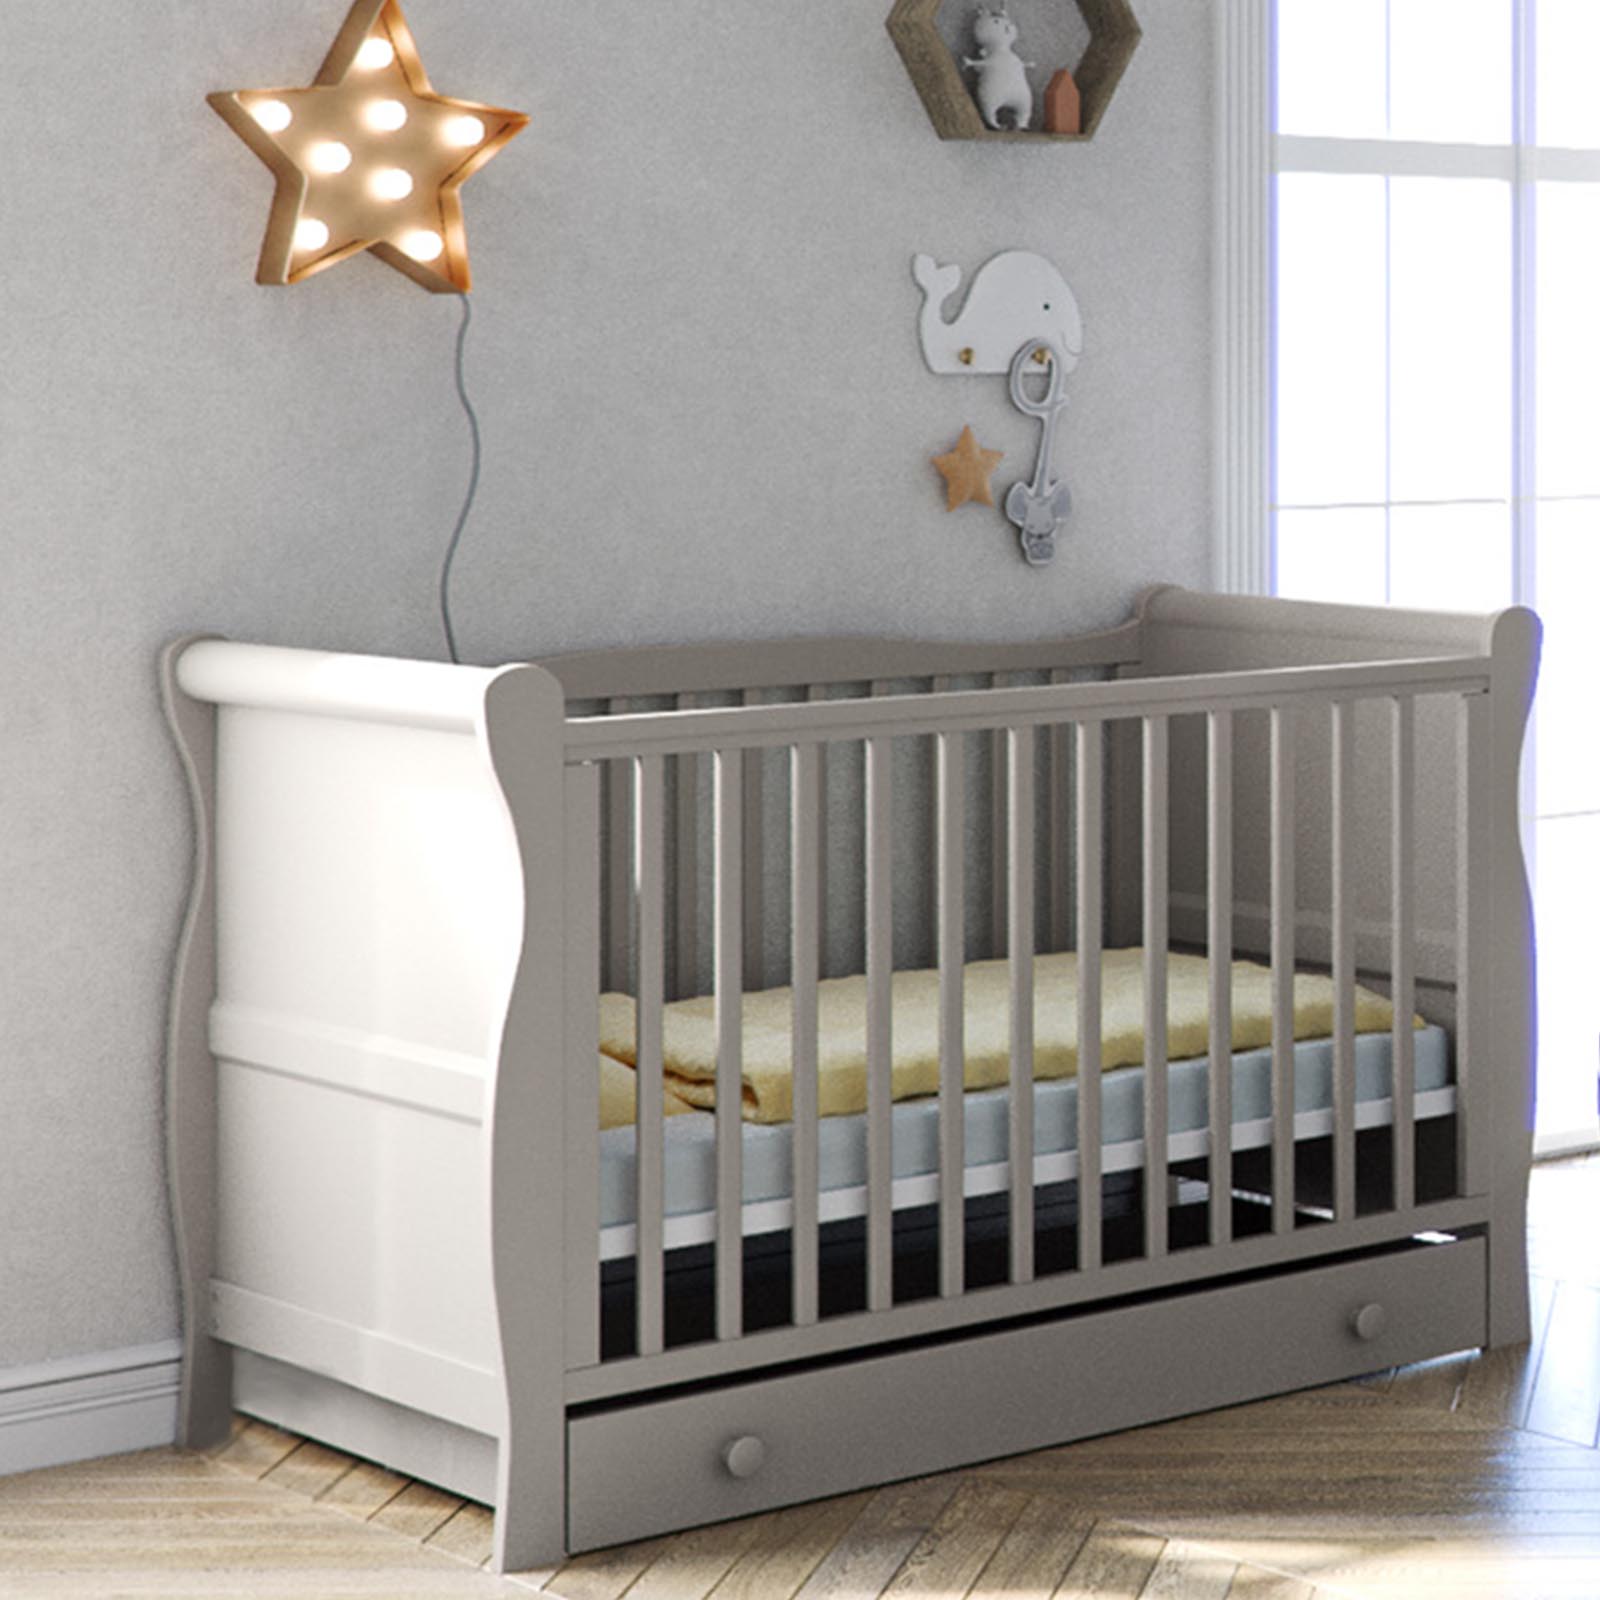 Little Acorns Sleigh Cot Bed With Deluxe Eco Fibre Mattress & Drawer - Grey